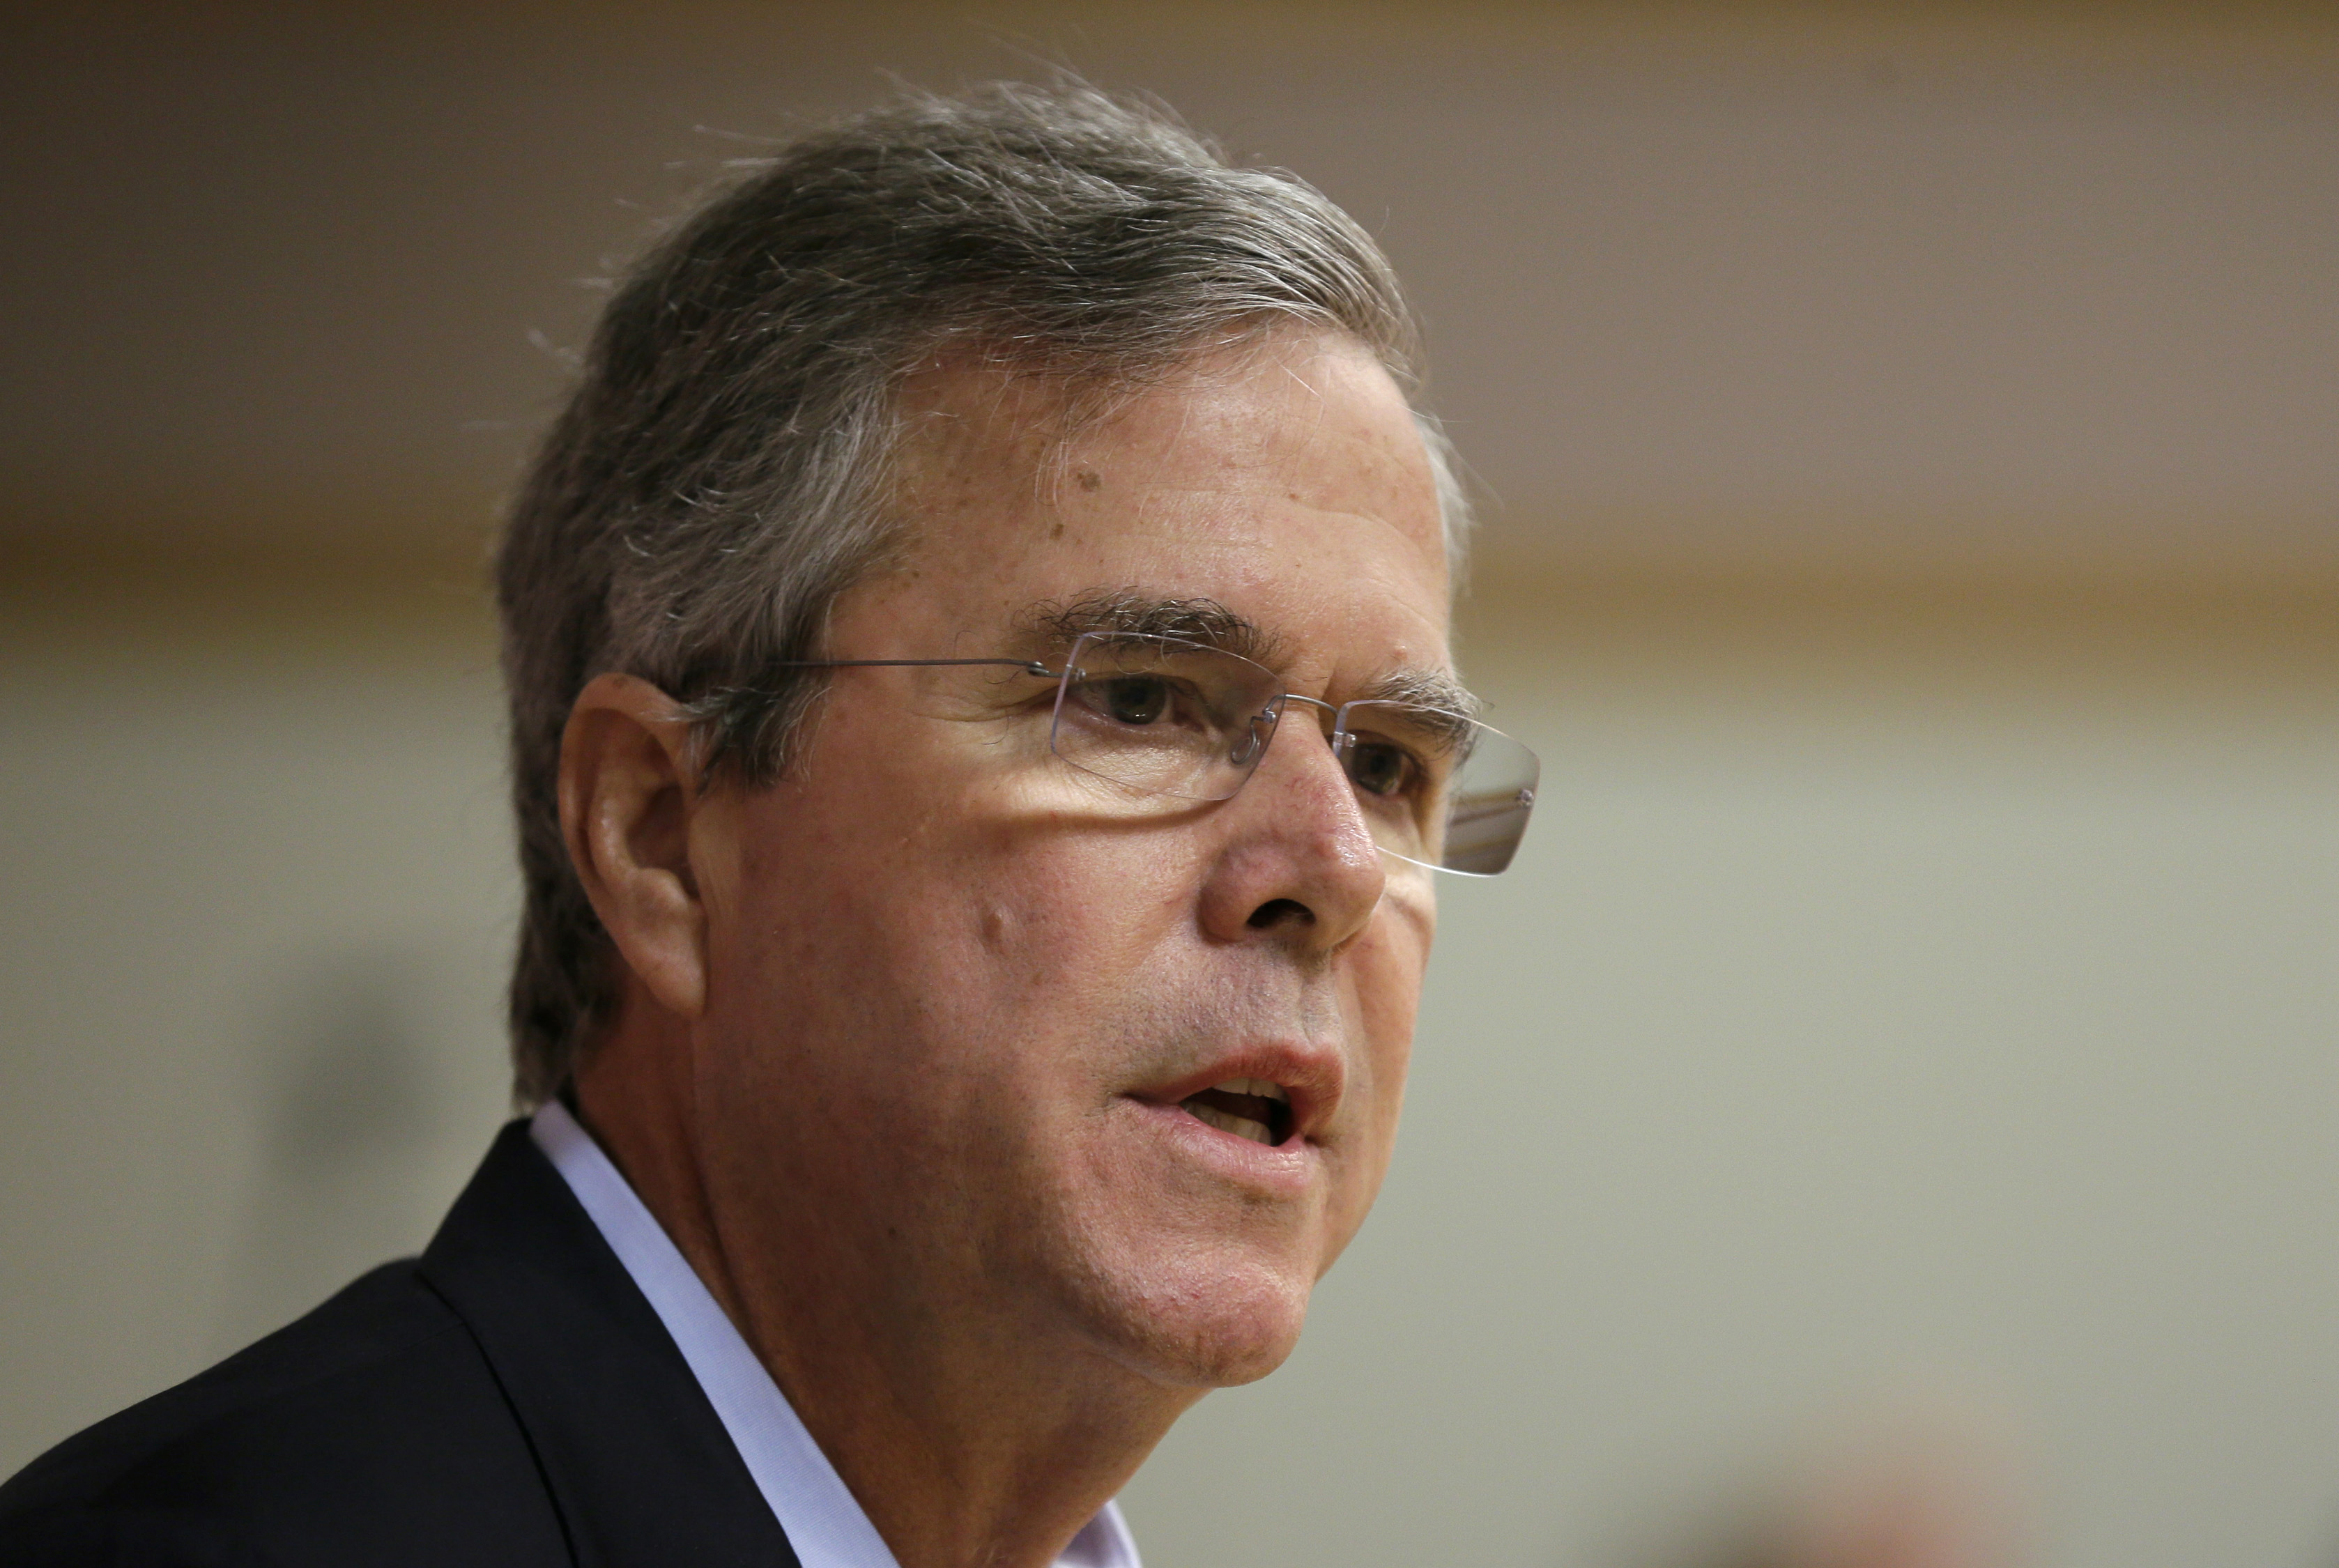 Former Florida Gov. Jeb Bush speaks during a town hall meeting, on May 16, 2015, at Loras College in Dubuque, Iowa.